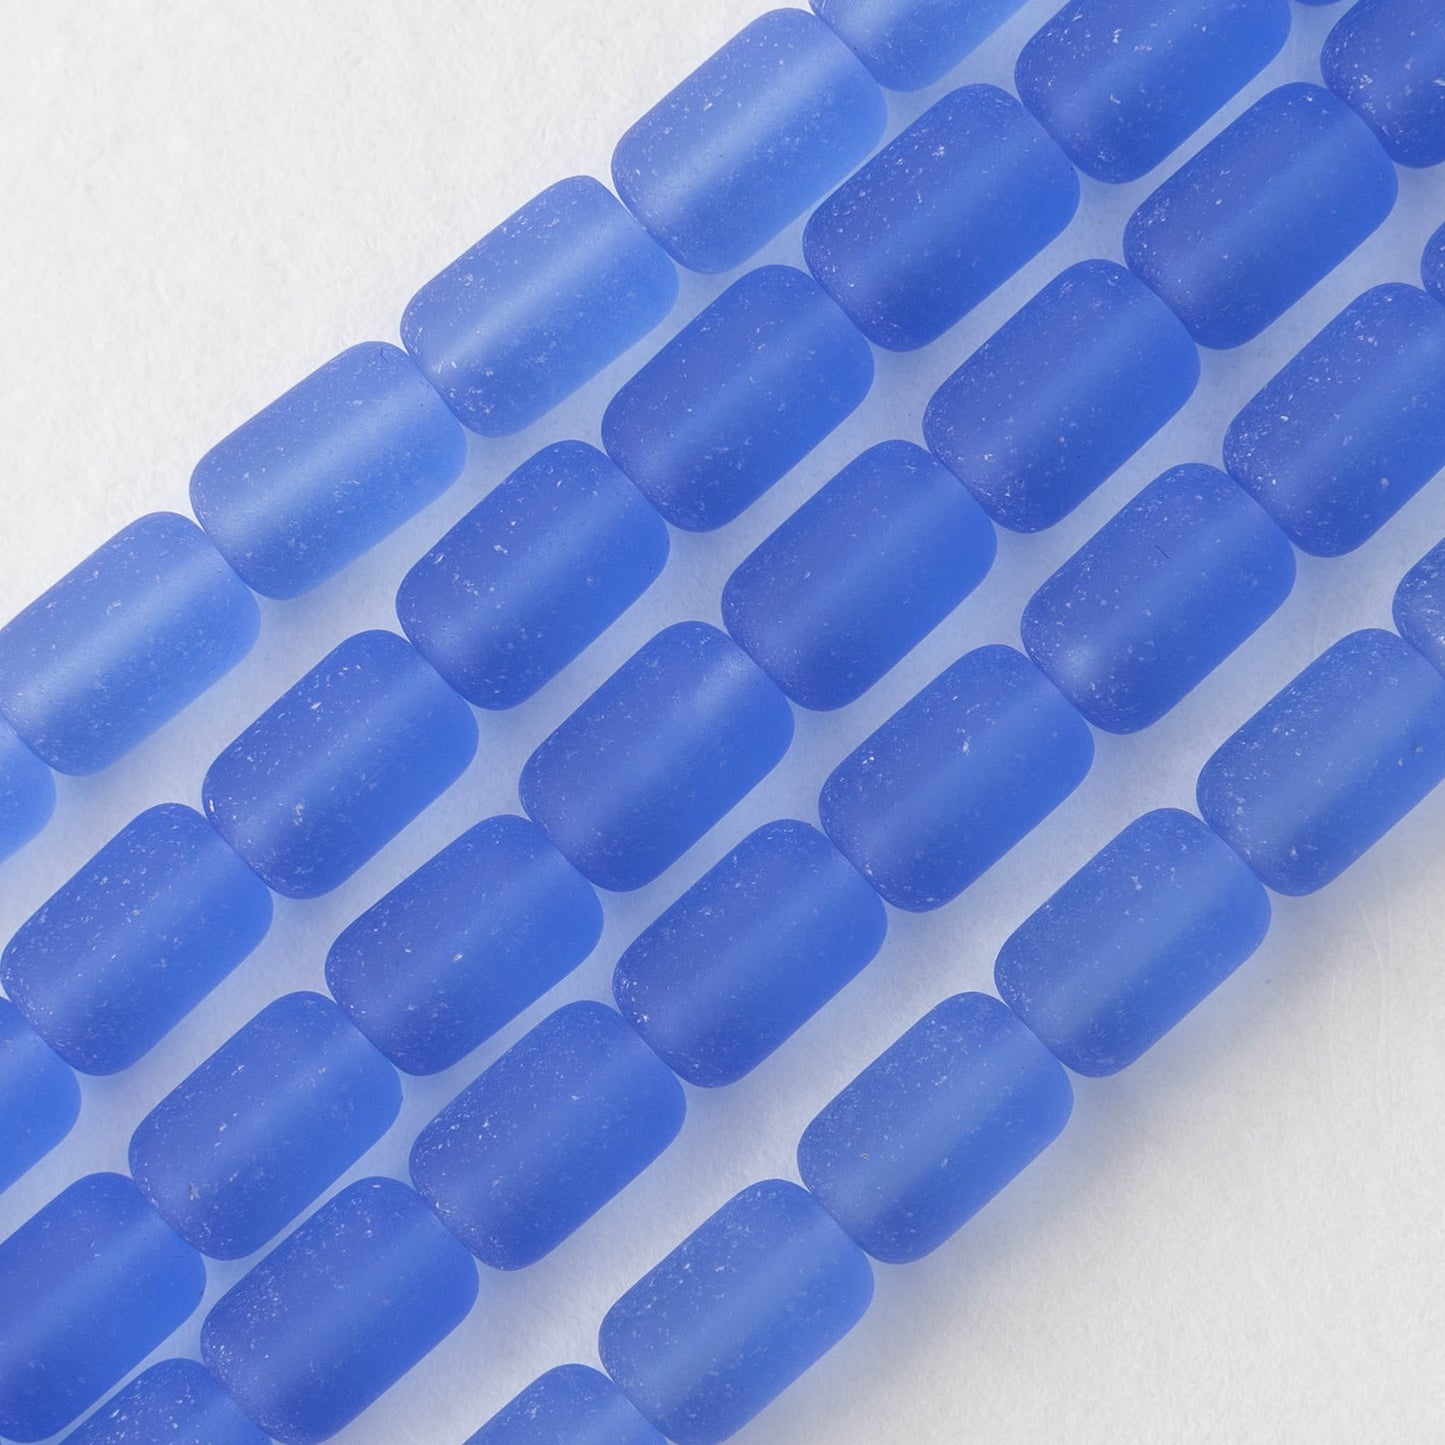 6x9mm Frosted Glass Tube Beads - Sapphire Blue - 26 beads